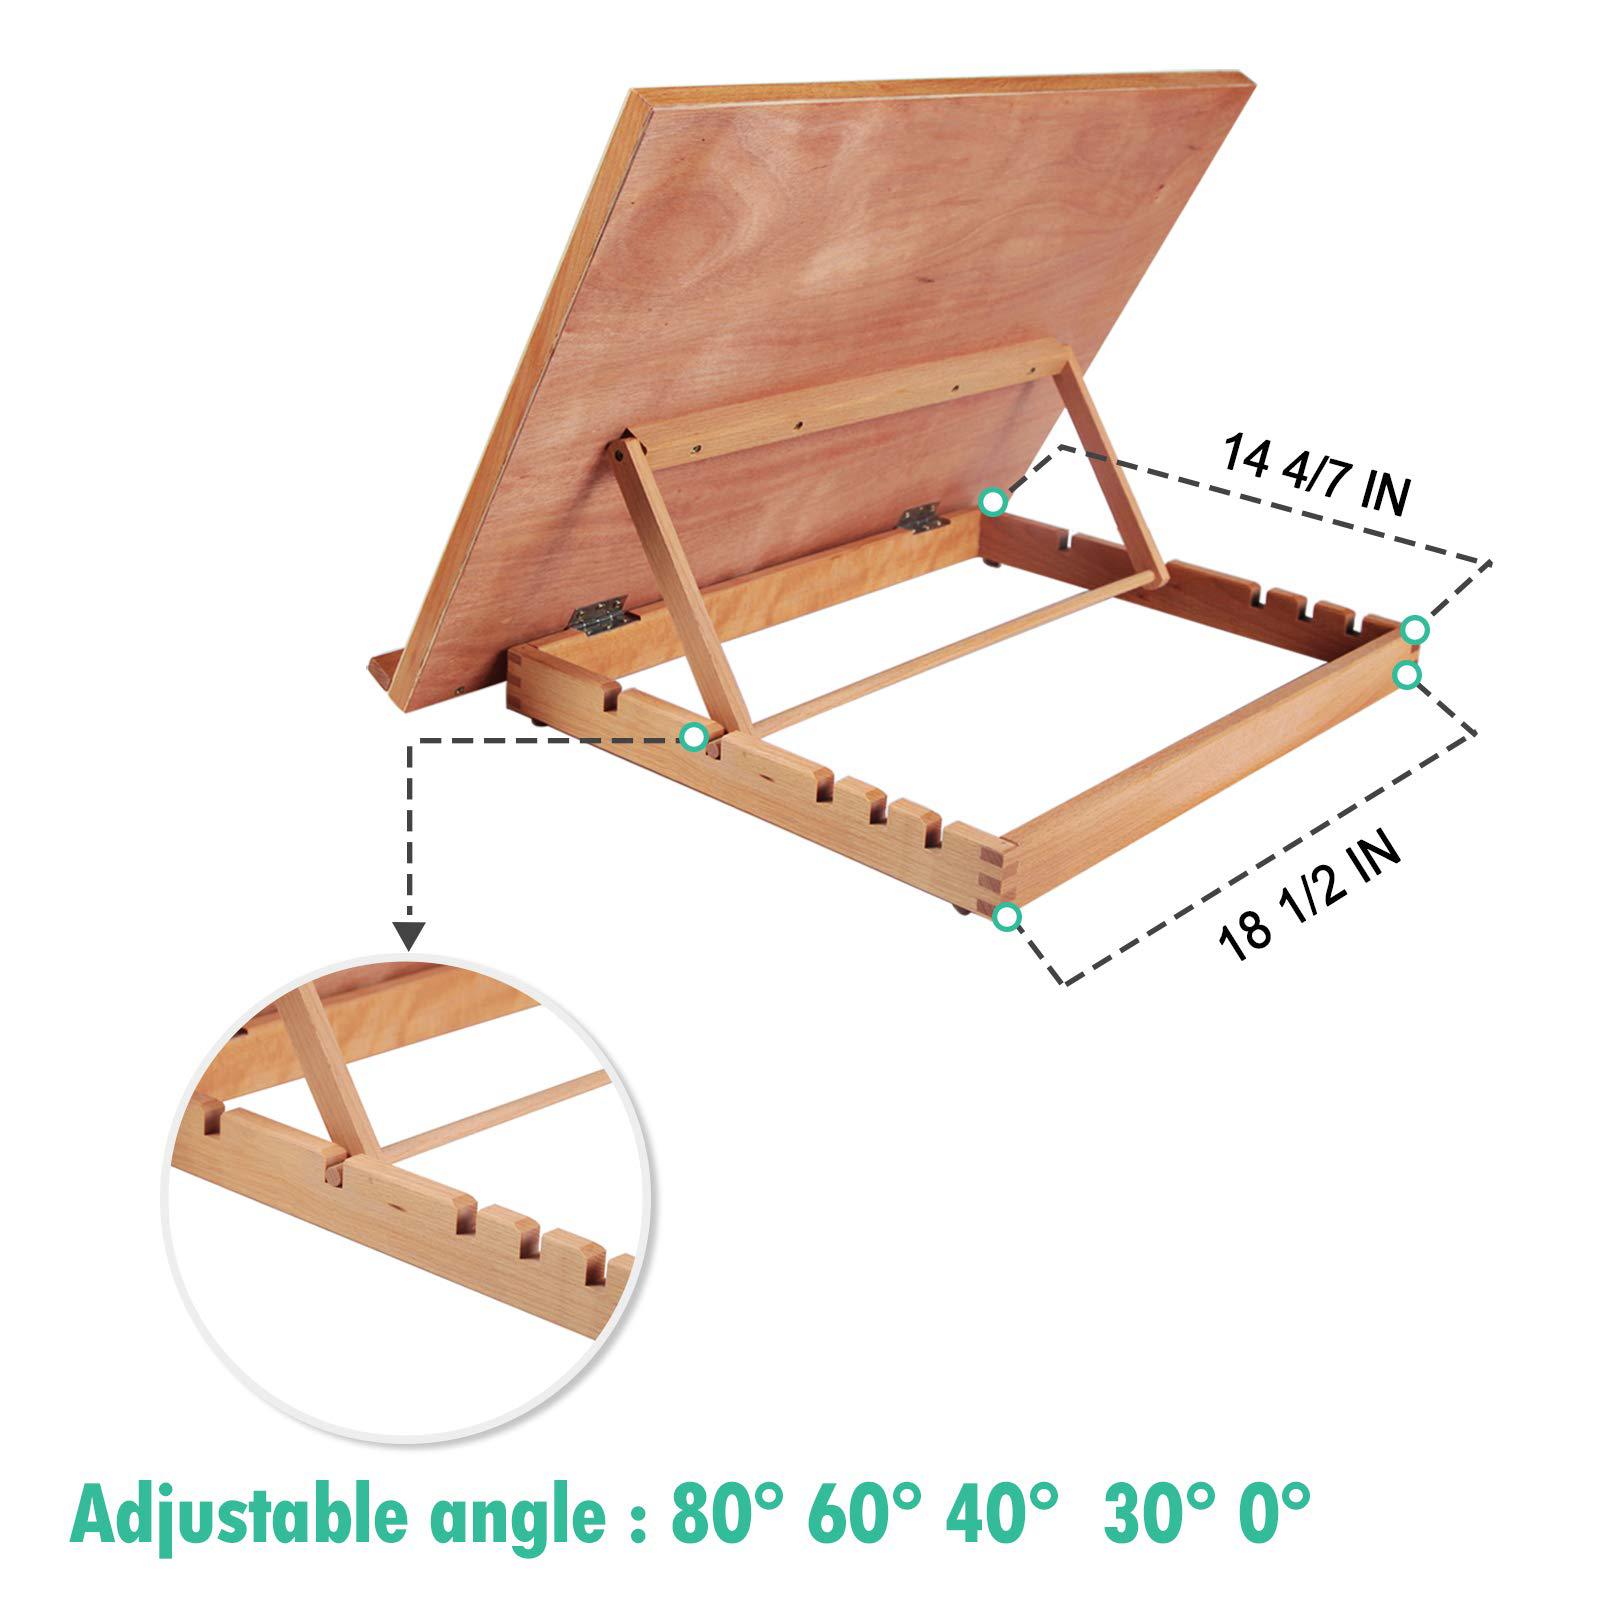 falling in art large 5-position wood drafting table easel drawing and sketching board, 23 2/9 inches by 16 1/2 inches